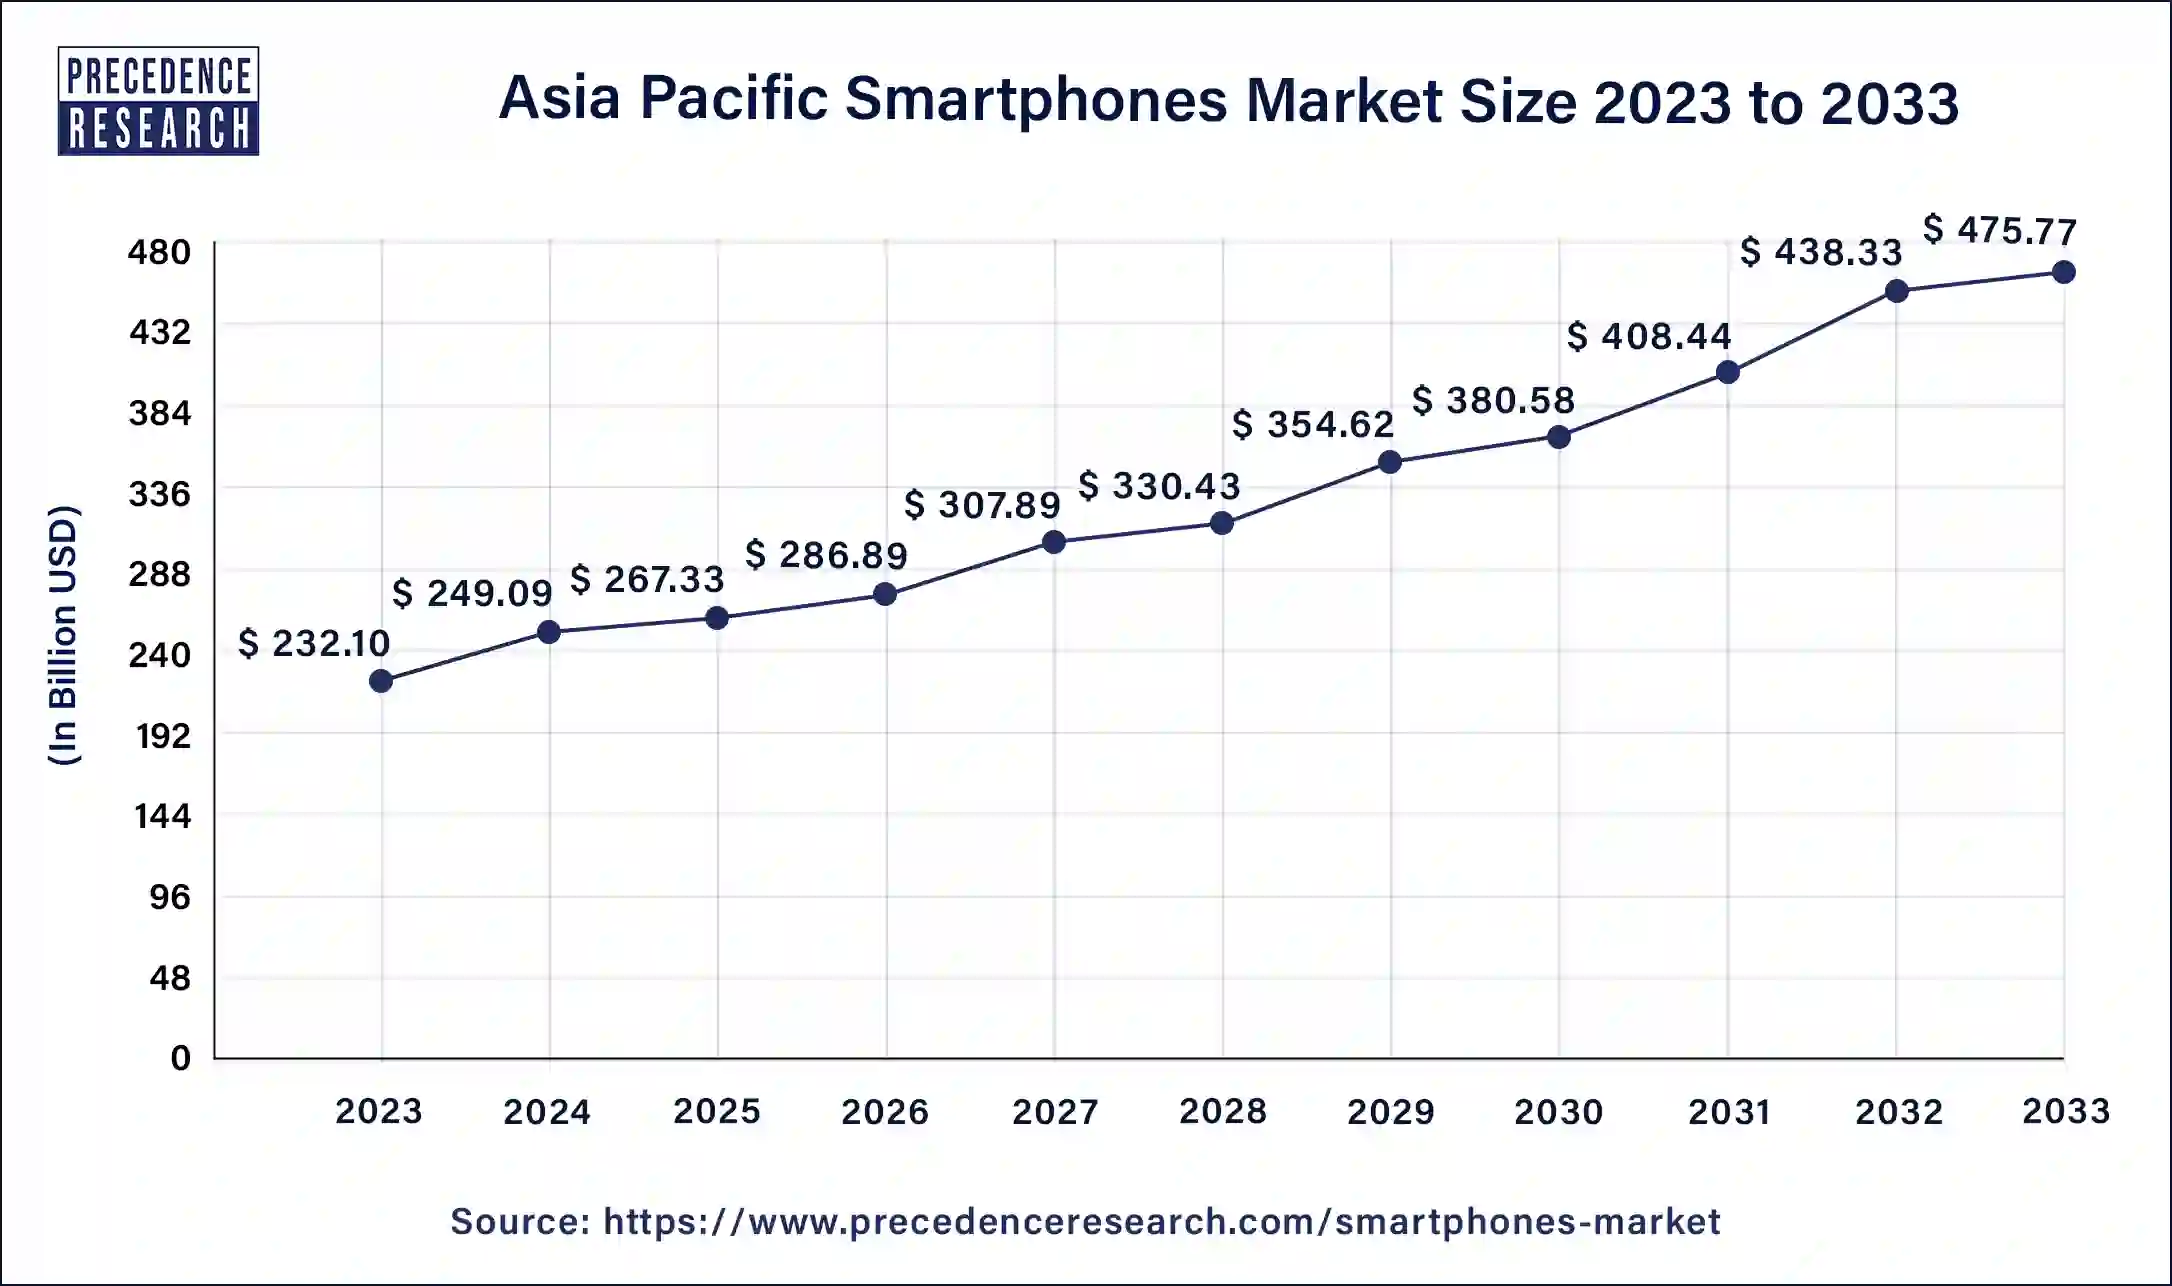 Asia Pacific Smartphones Market Size 2024 to 2033